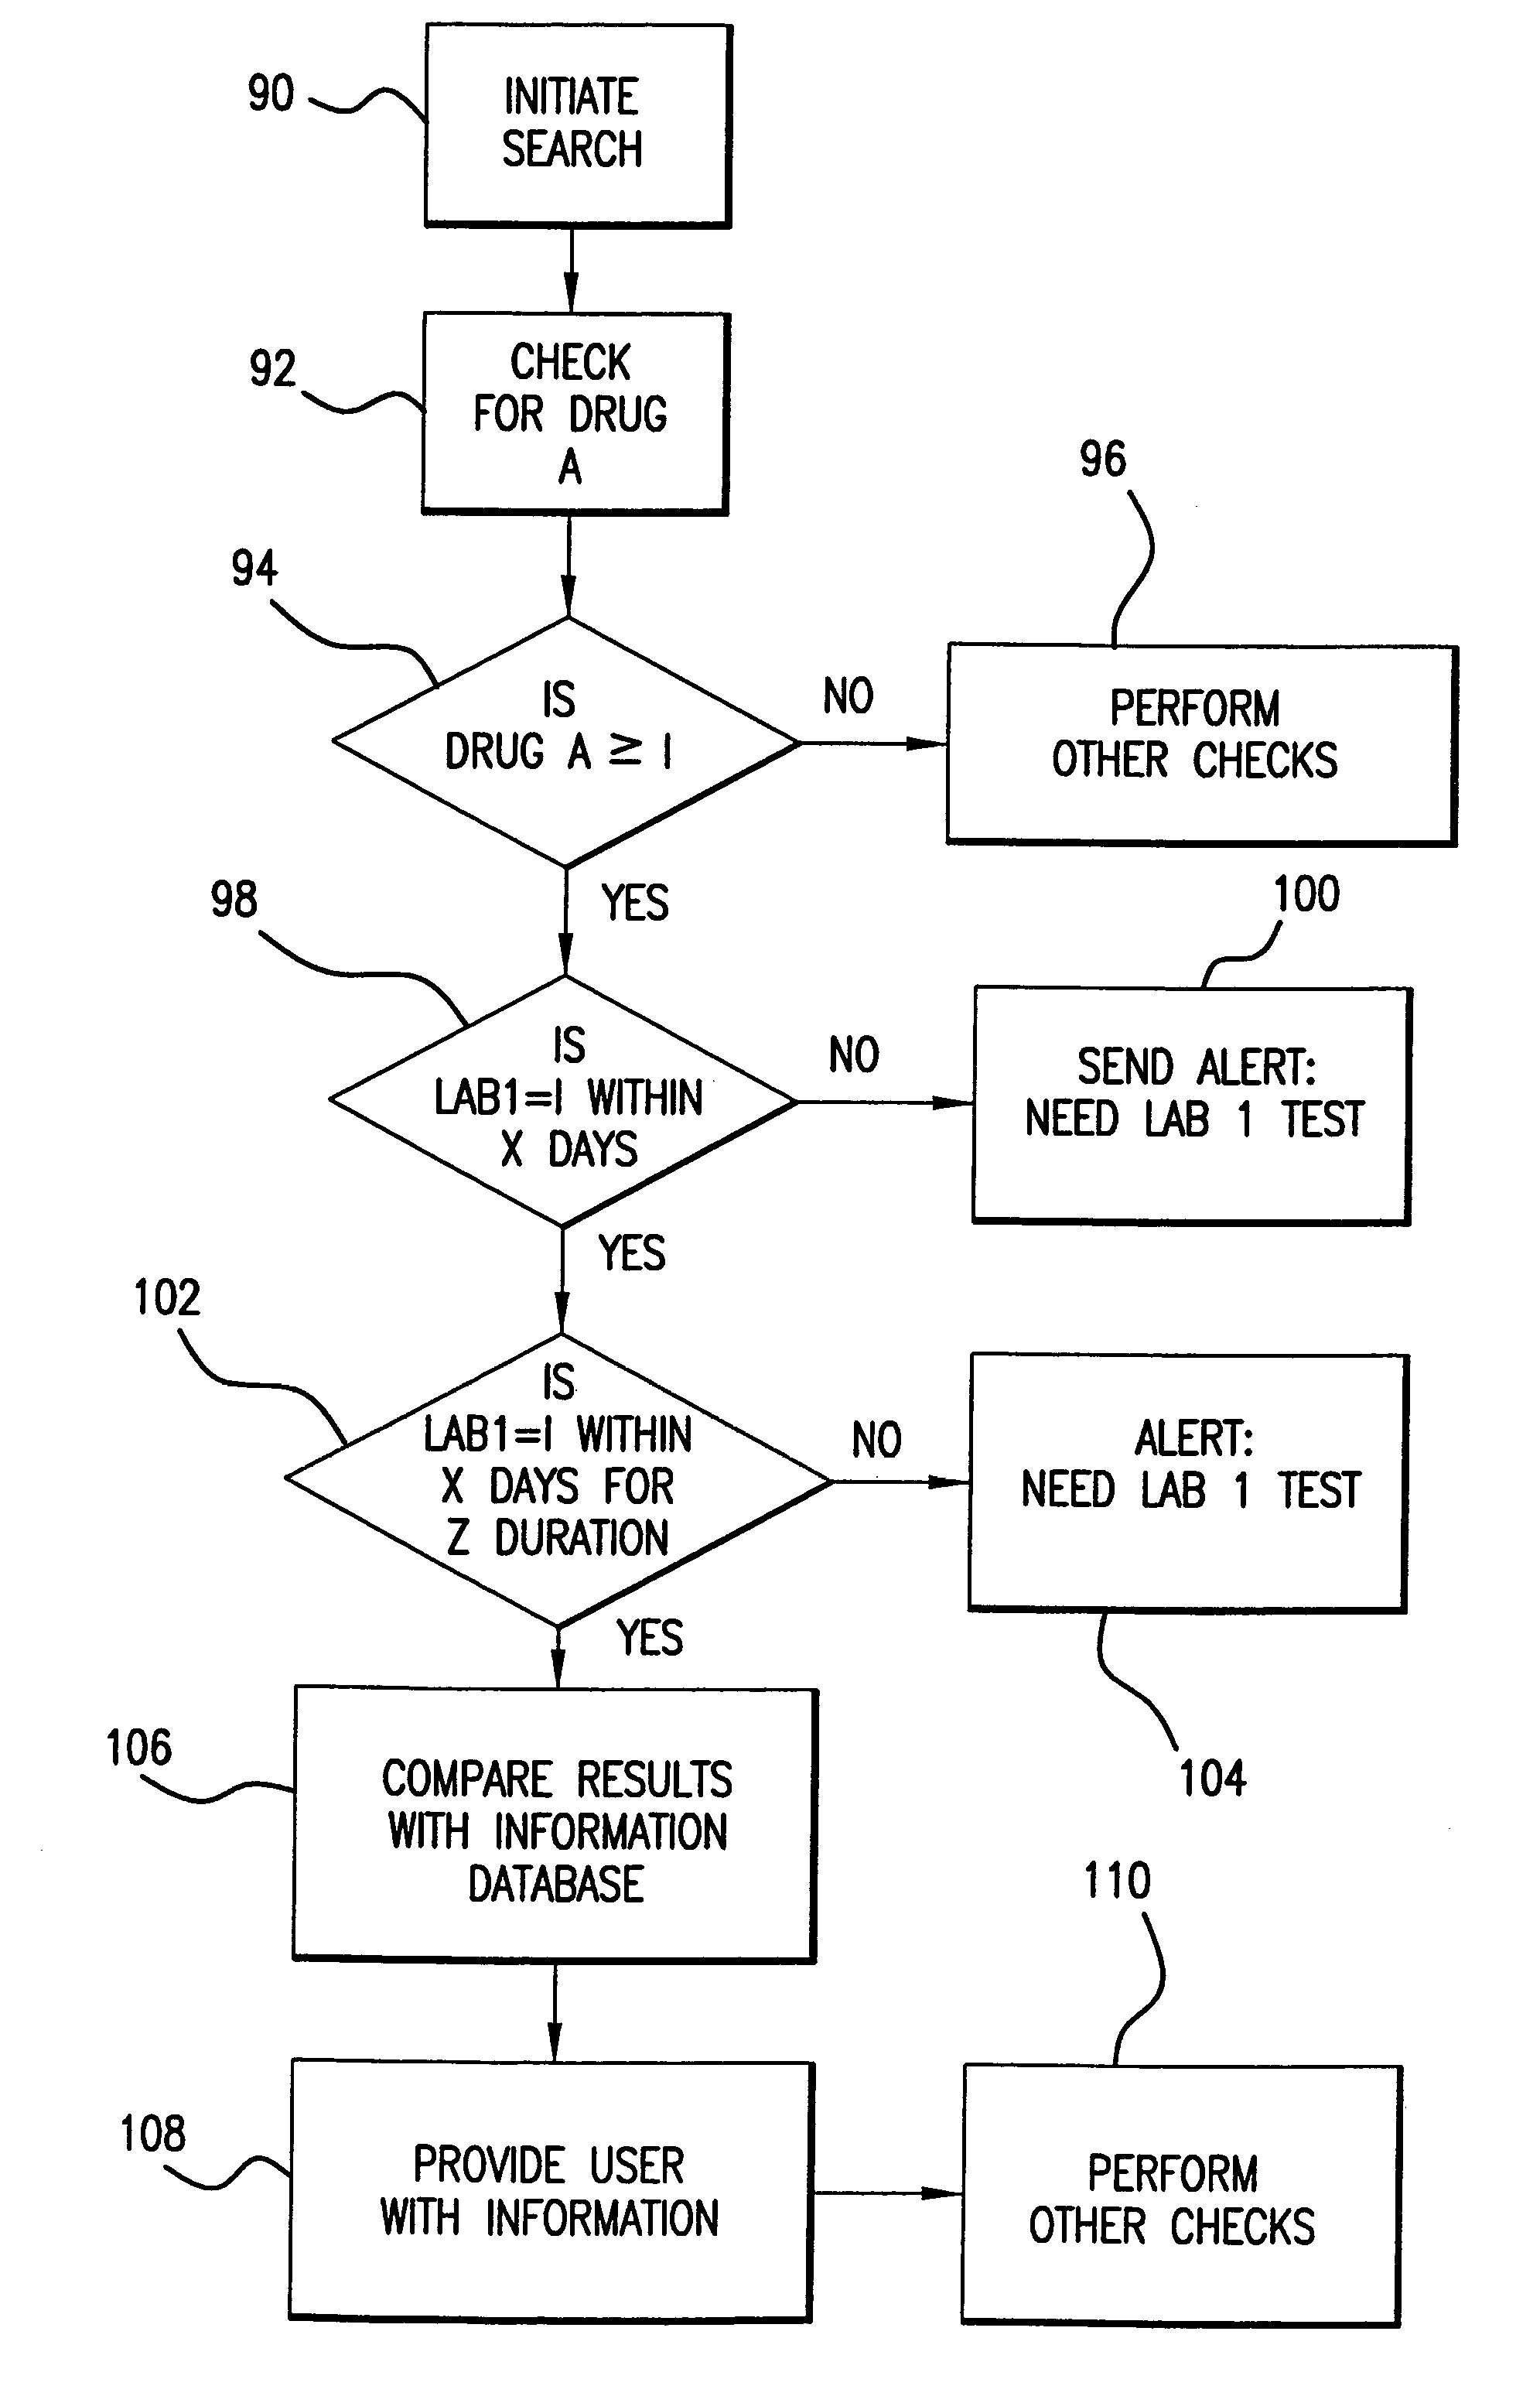 System for monitoring regulation of pharmaceuticals from data structure of medical and labortory records